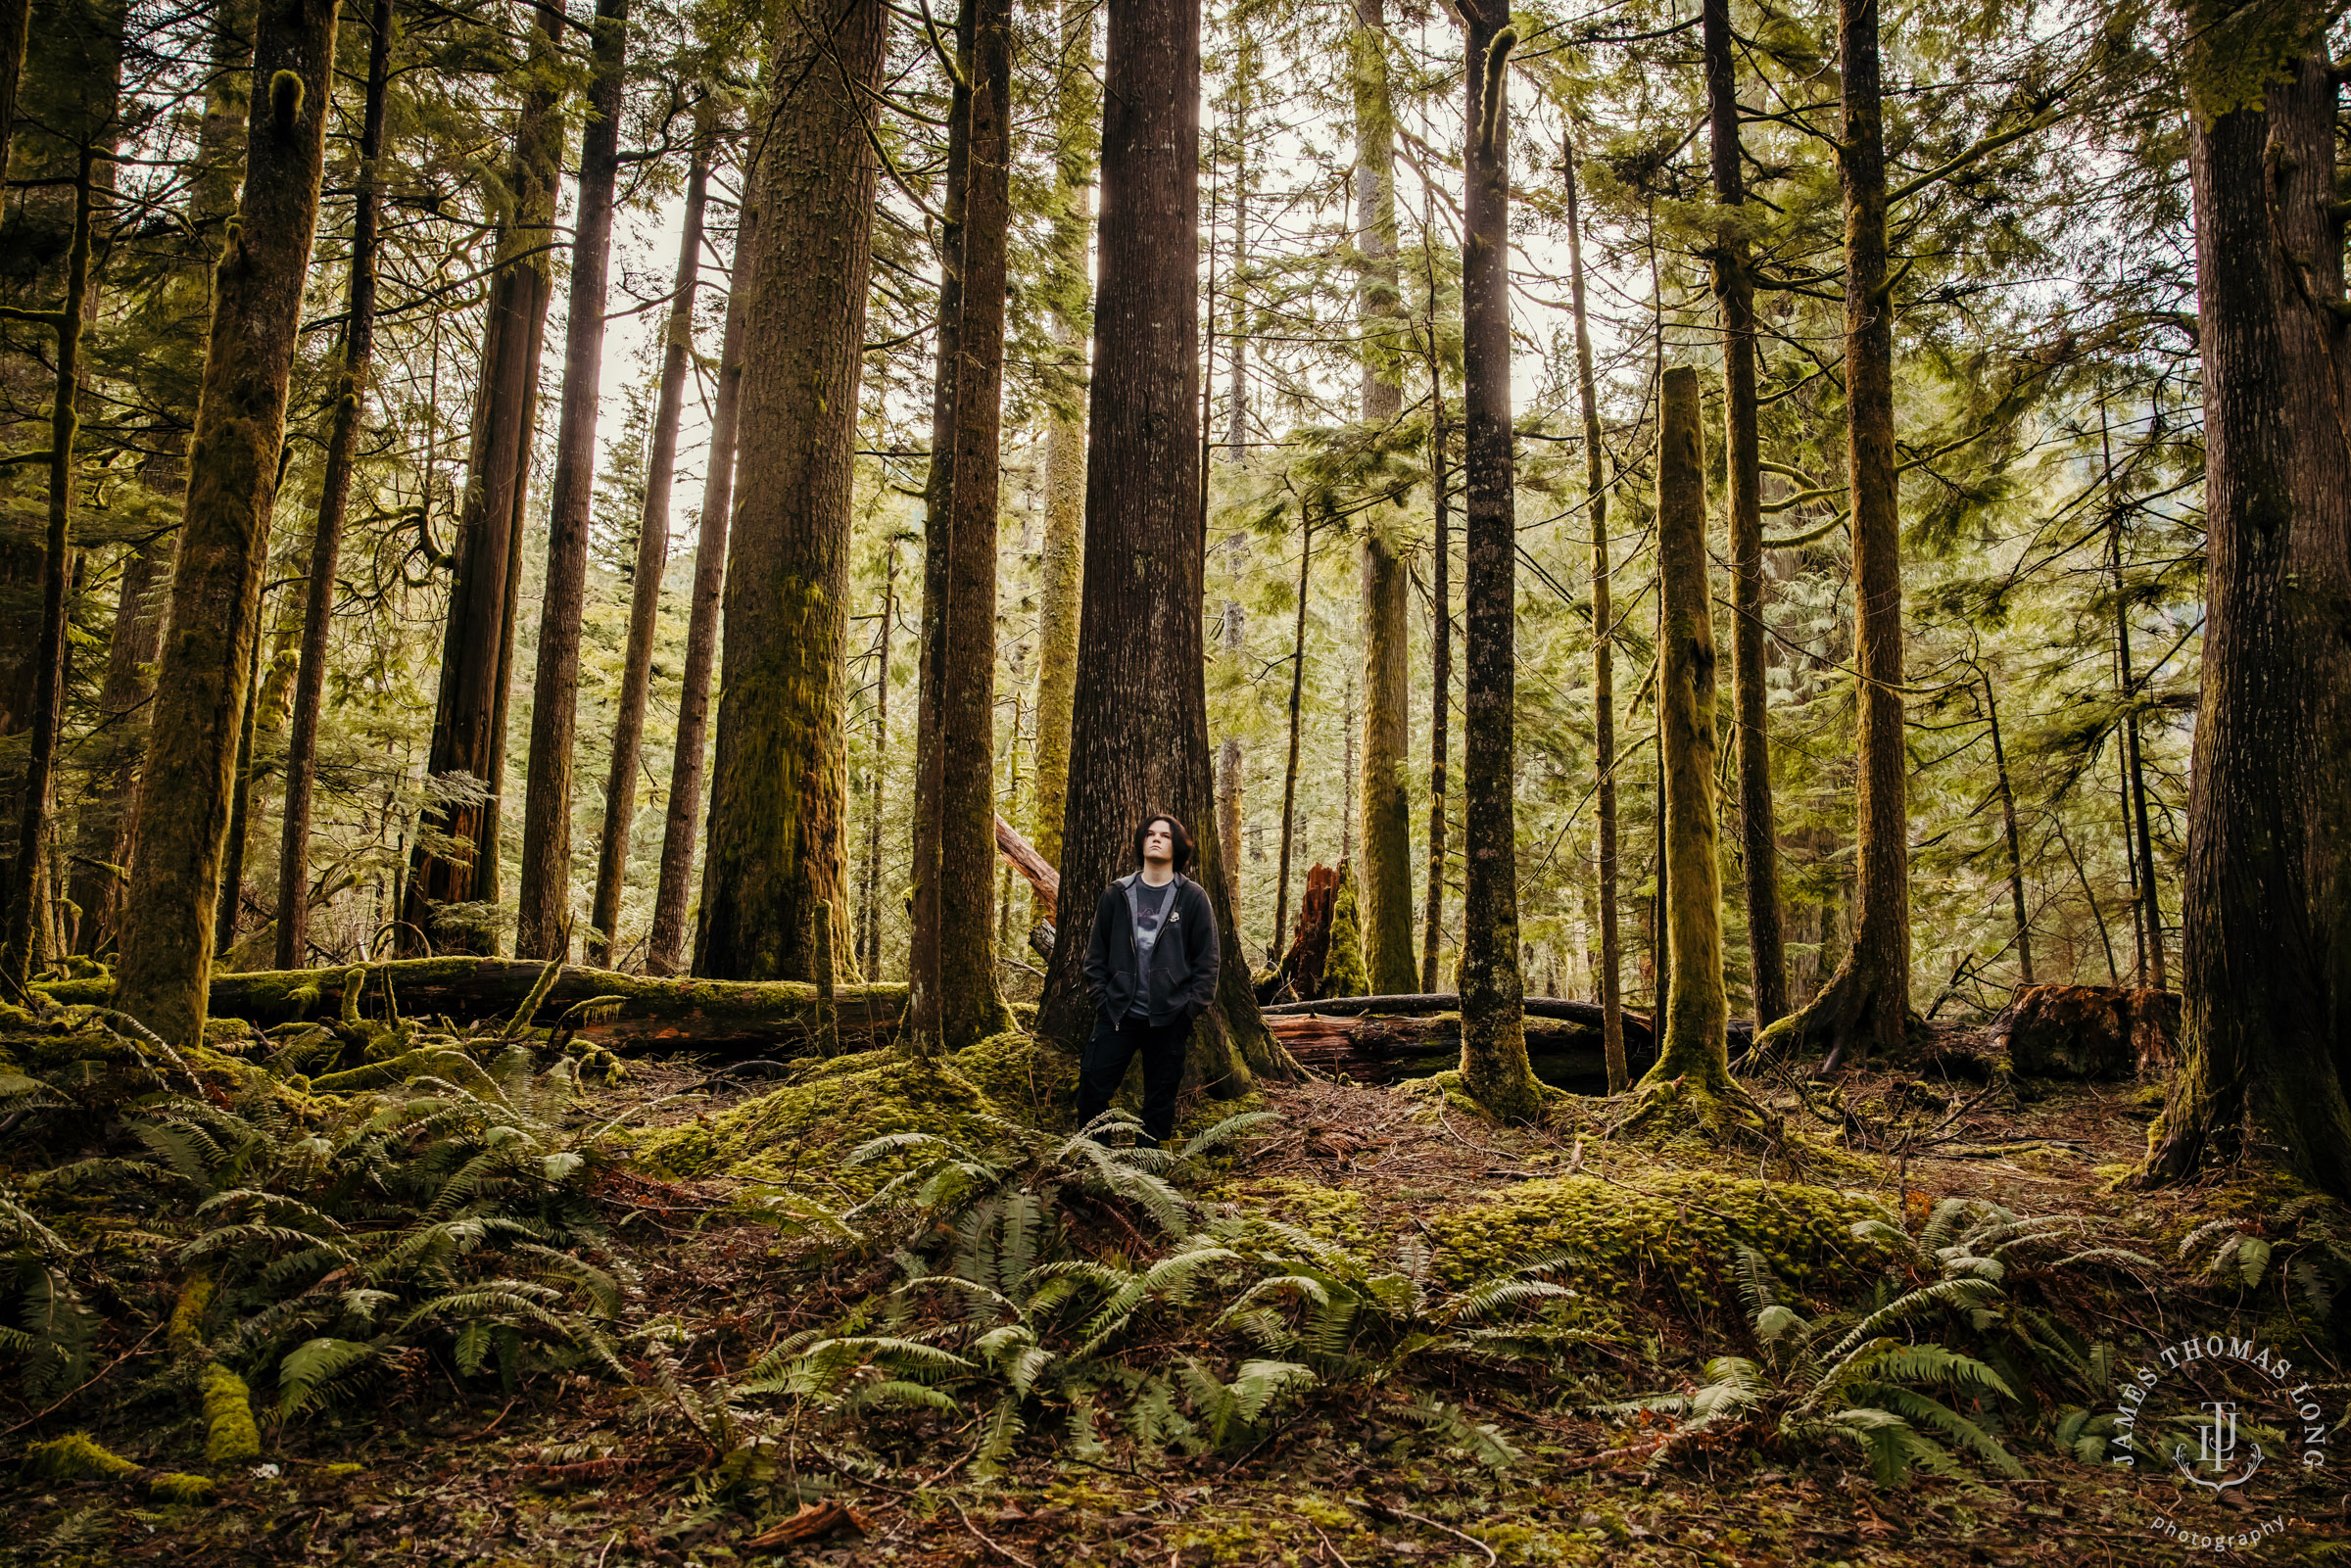 Pacific Northwest senior portrait session in the forest by Seattle senior portrait photographer James Thomas Long Photography